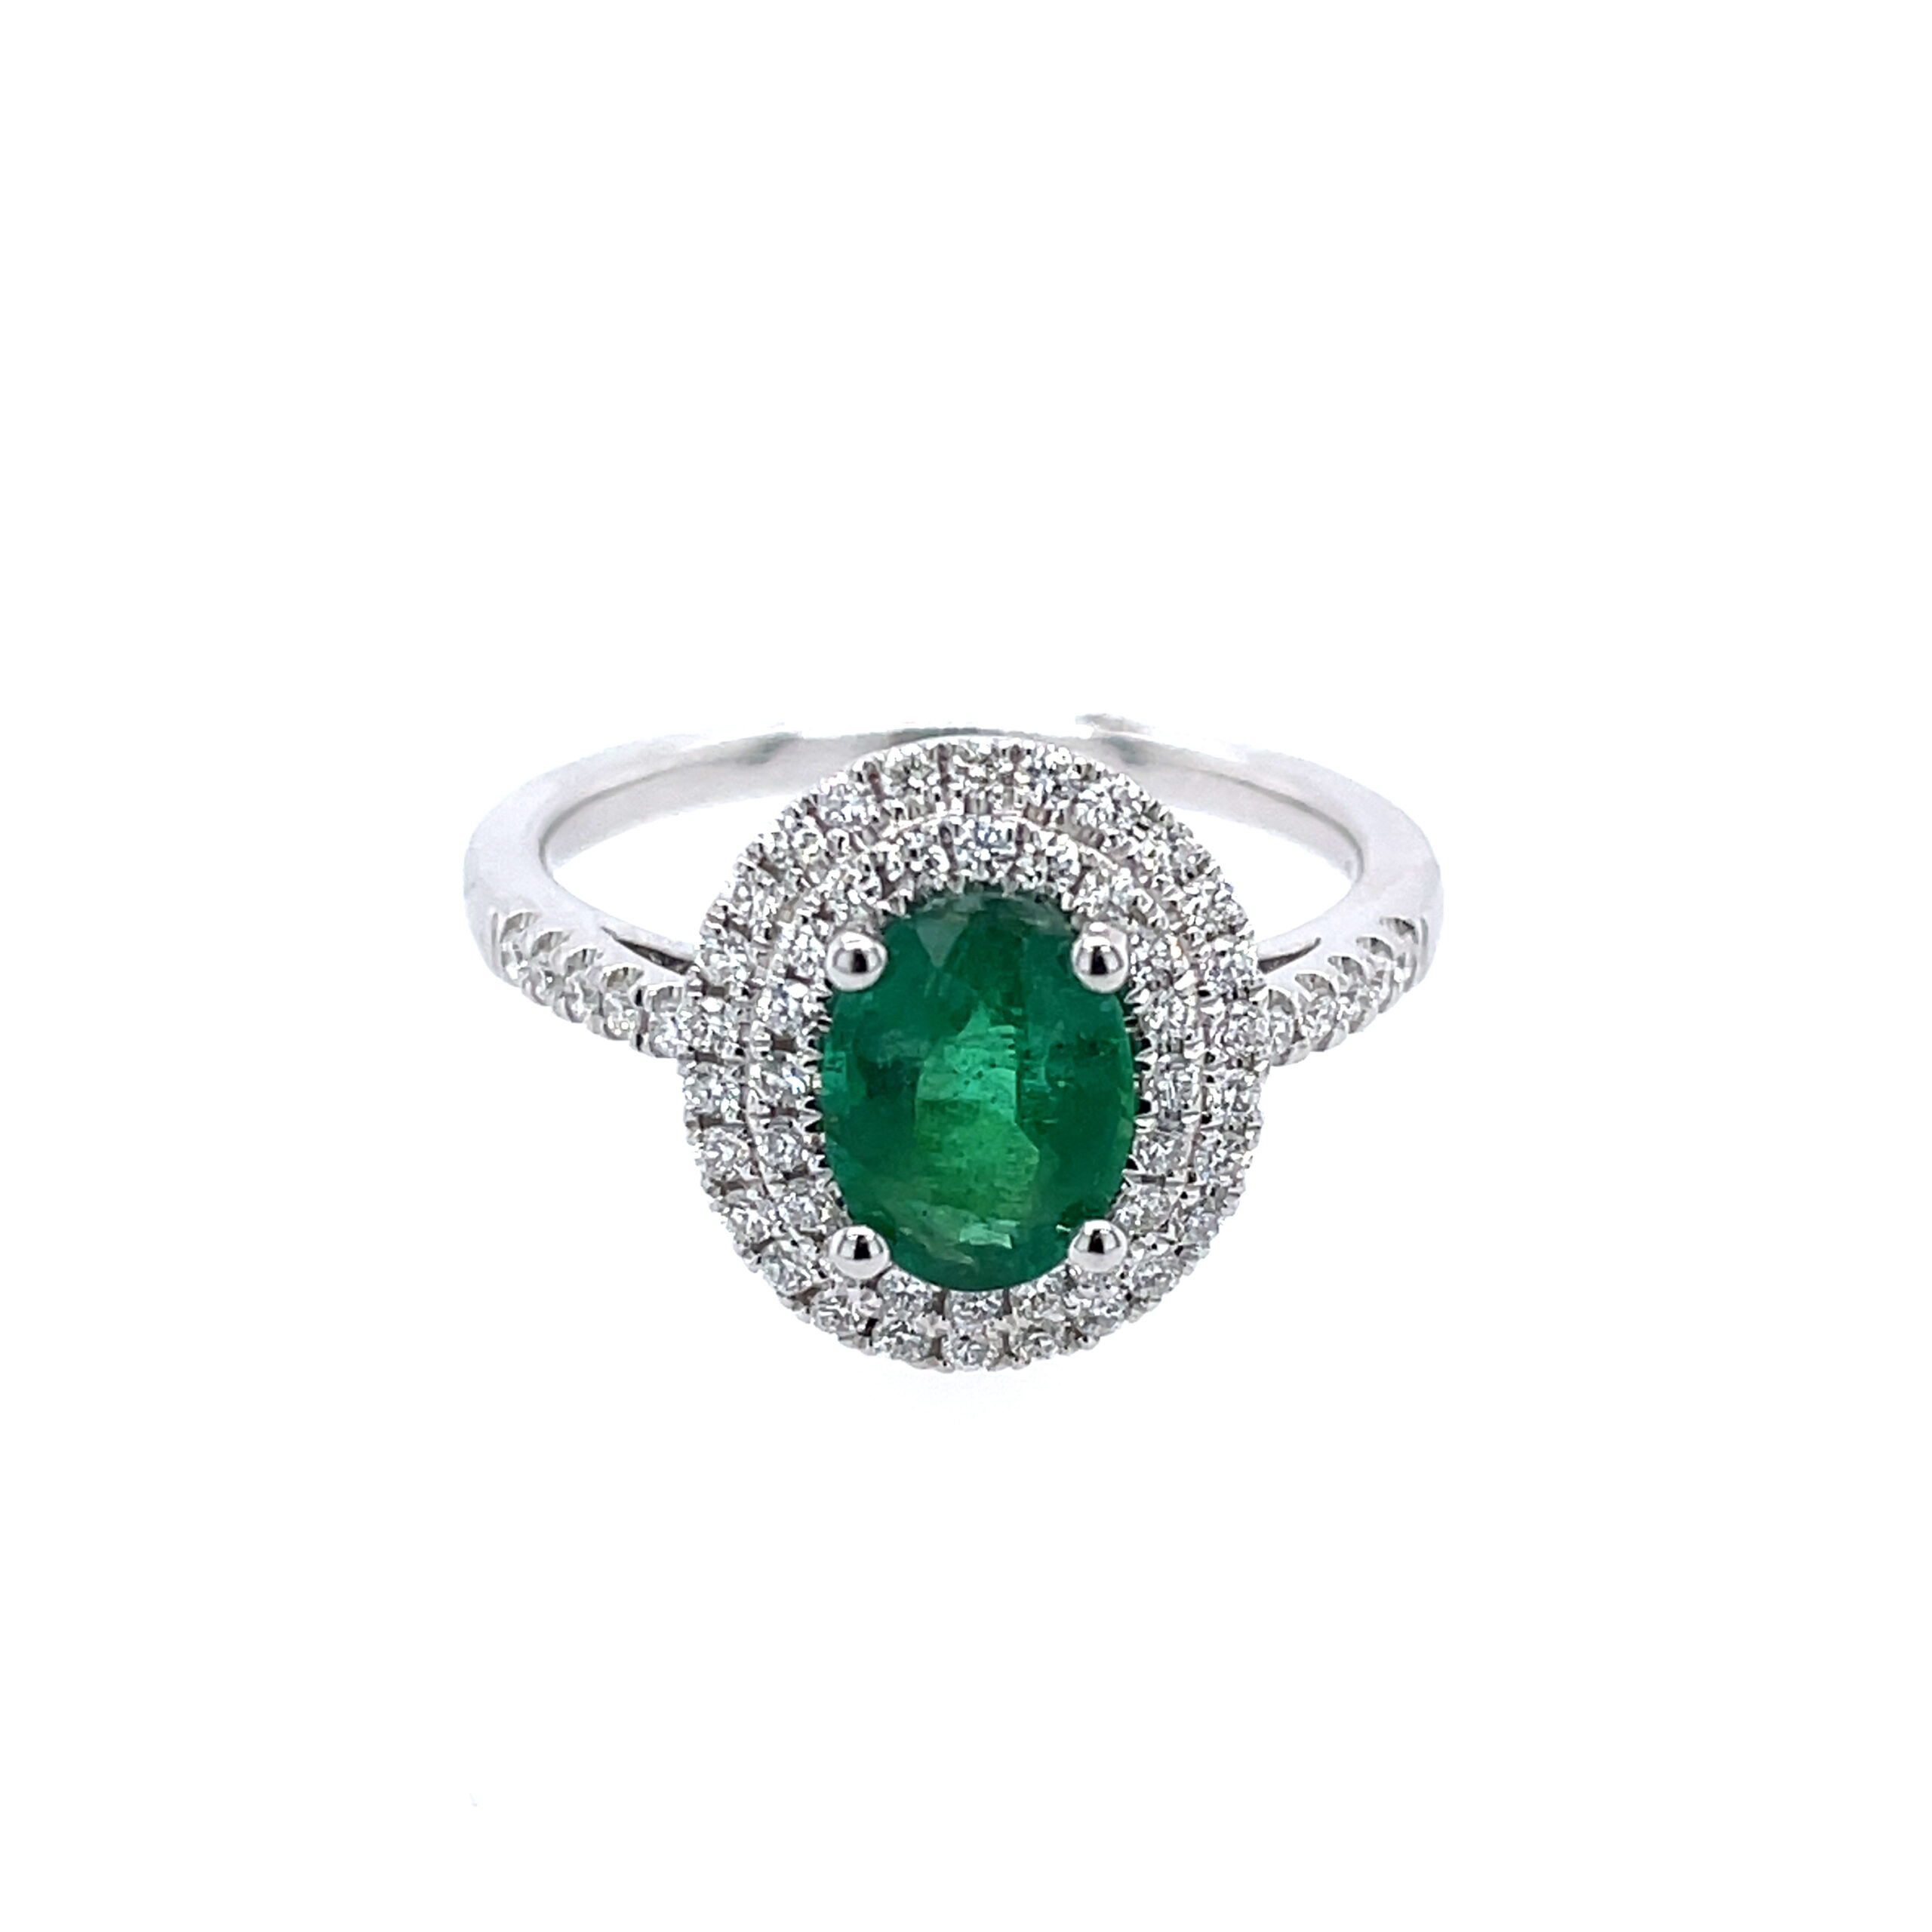 White Gold Double Halo Emerald Ring